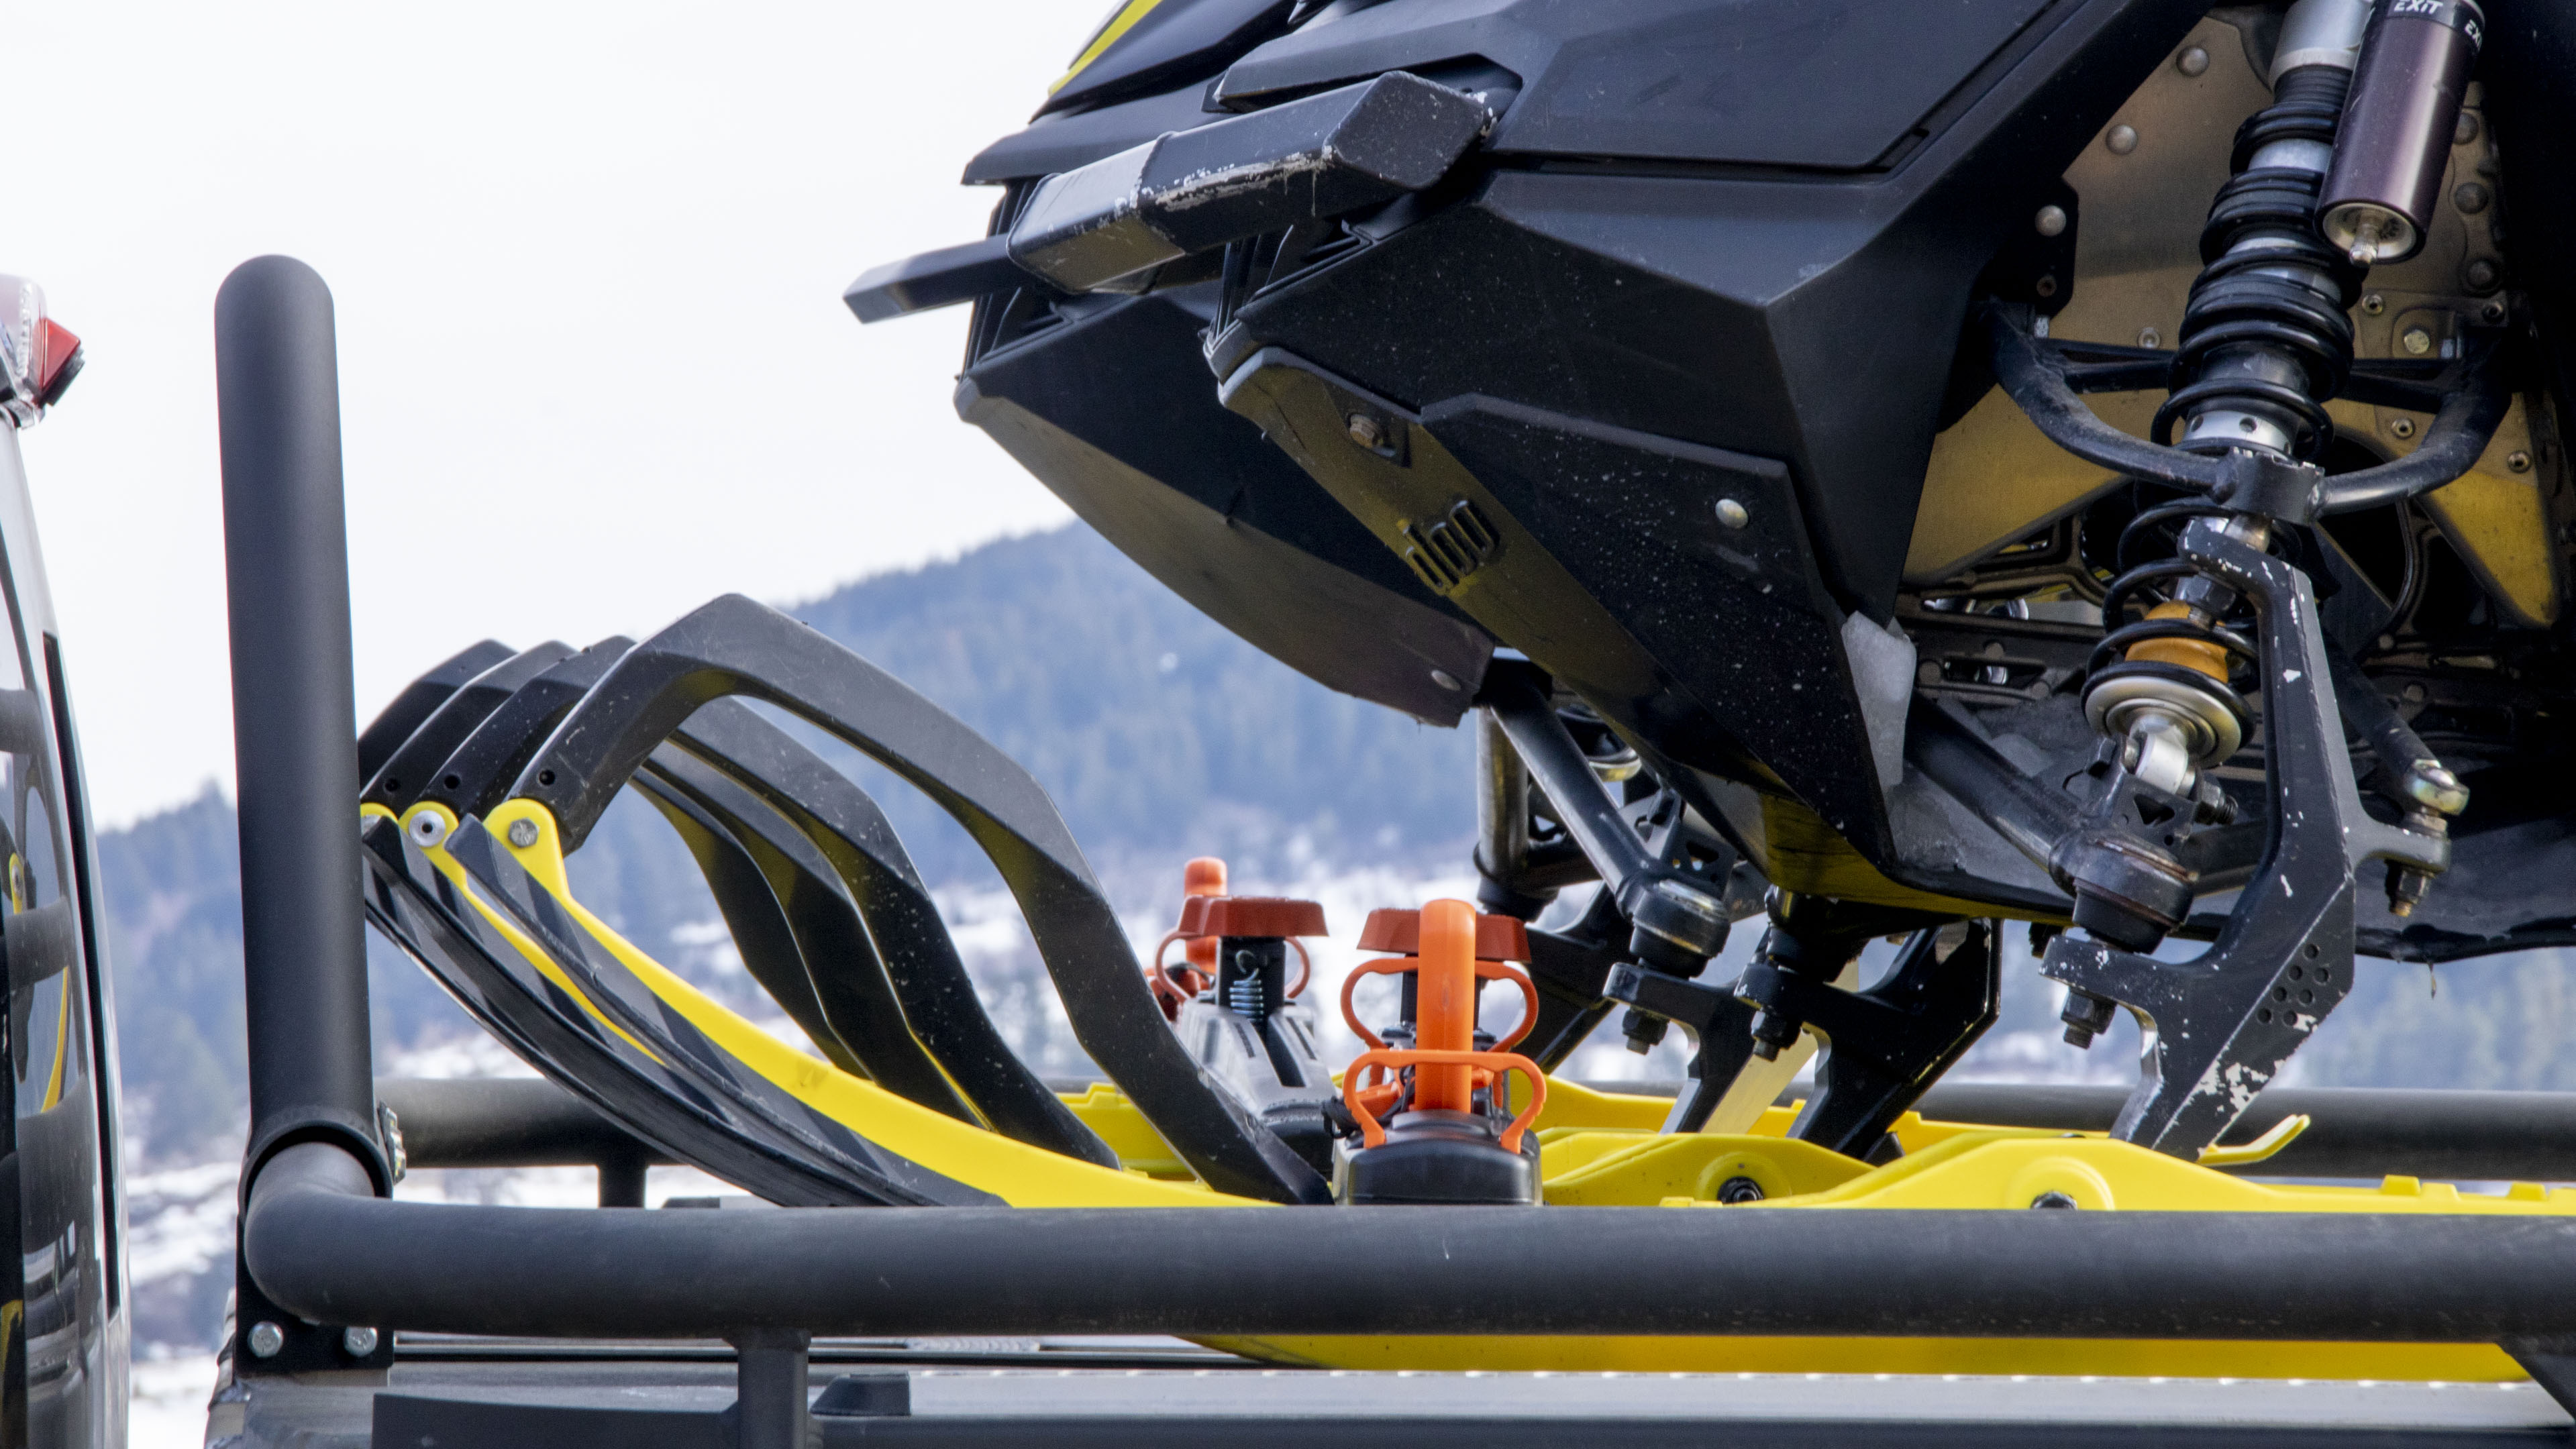 Sled clamp on the snowmobile skis to secure for transport. One of the many options to hold cargo, atvs, sled, and side-by-sides on the deck.